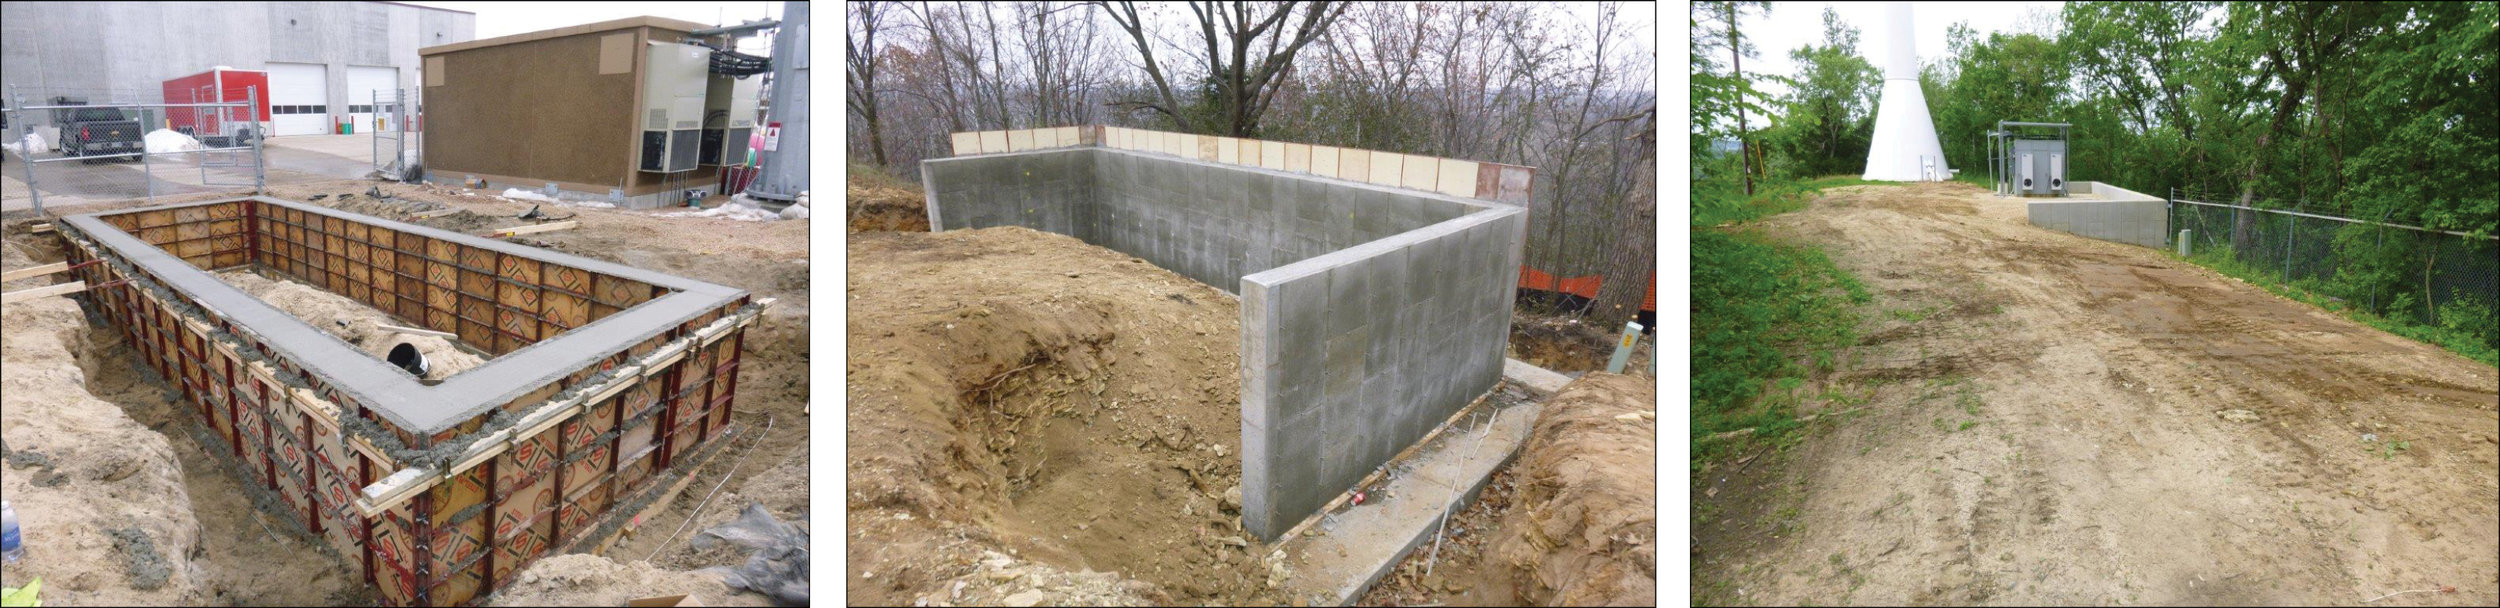 Construction foundation for Tower